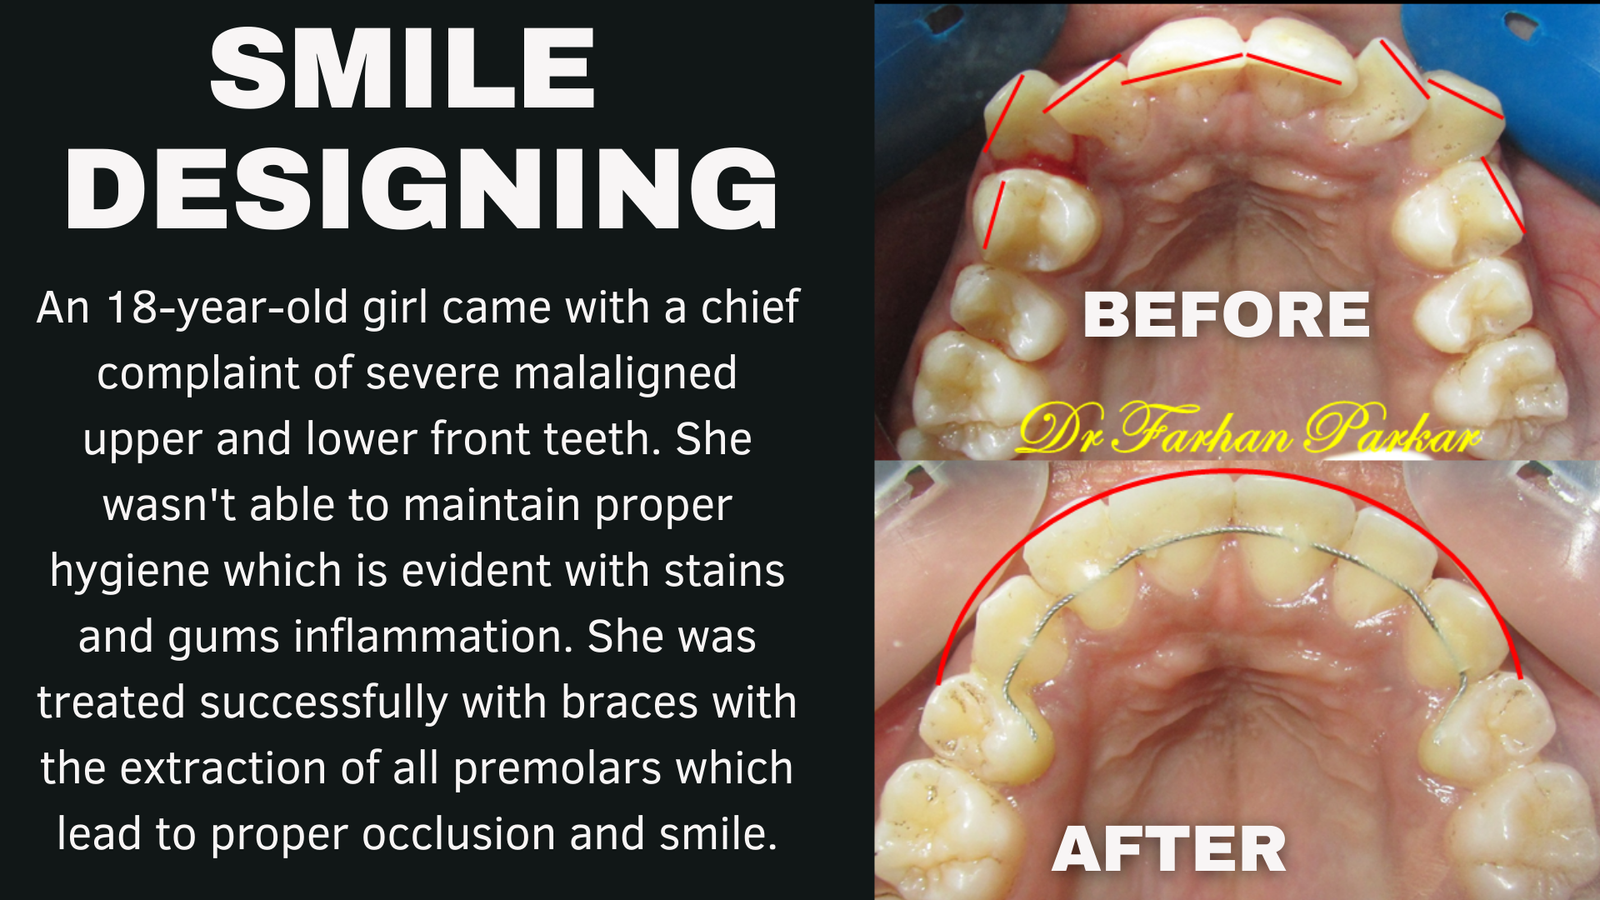 You are currently viewing Teeth Straightening Treatment with Braces in Bandra | Straightening Teeth (invisalign) In Bandra.